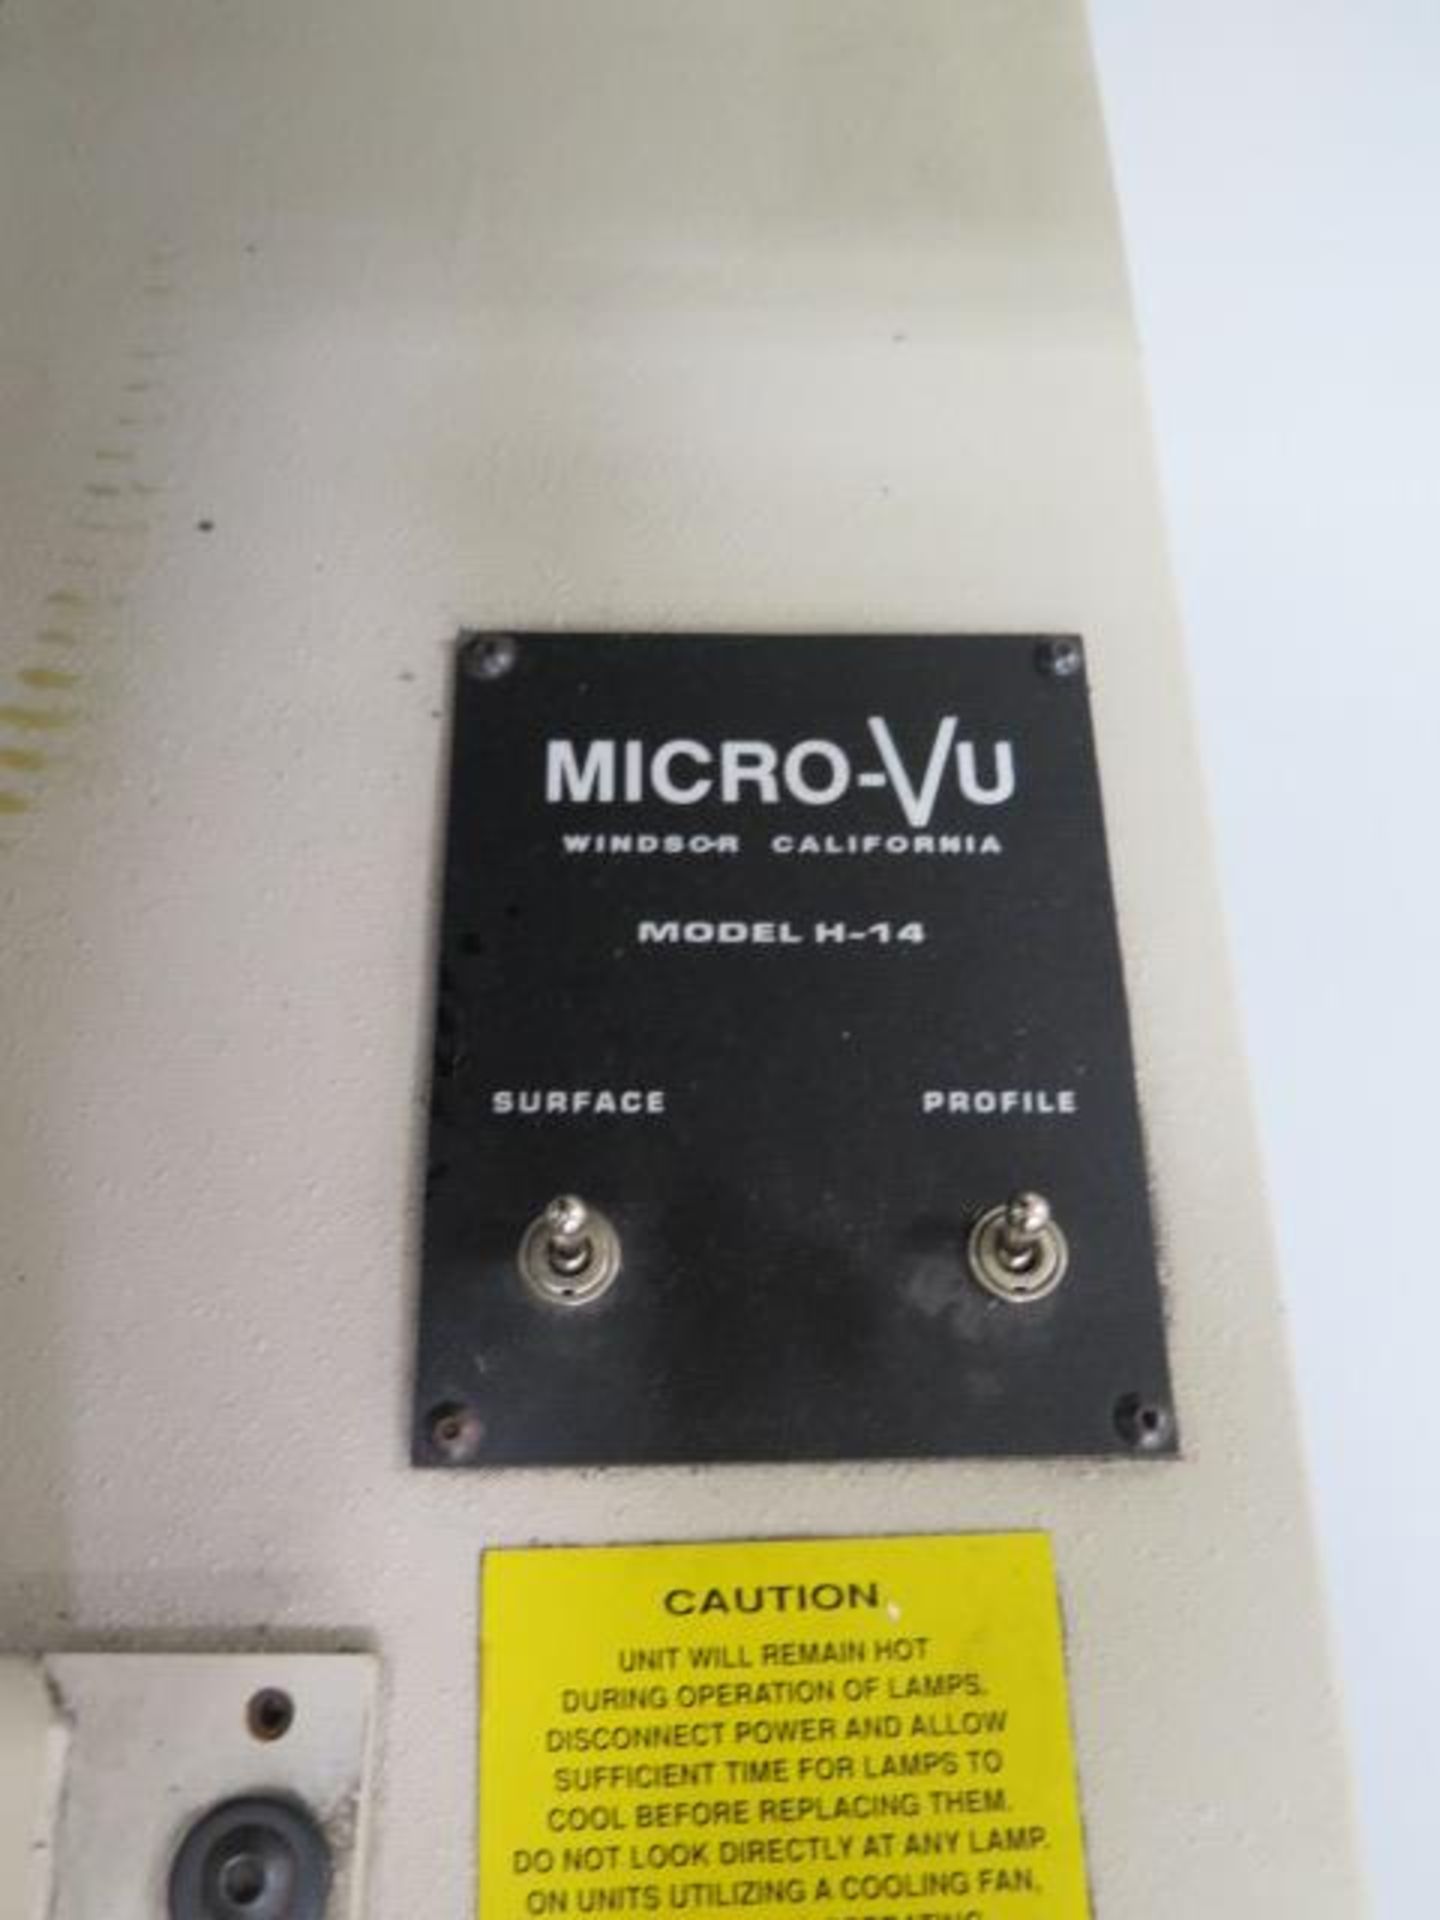 MicroVu mdl. H-14 14” Optical Comparator s/n 3328 w/ Sargon DRO, Surface and Profile, SOLD AS IS - Image 8 of 9